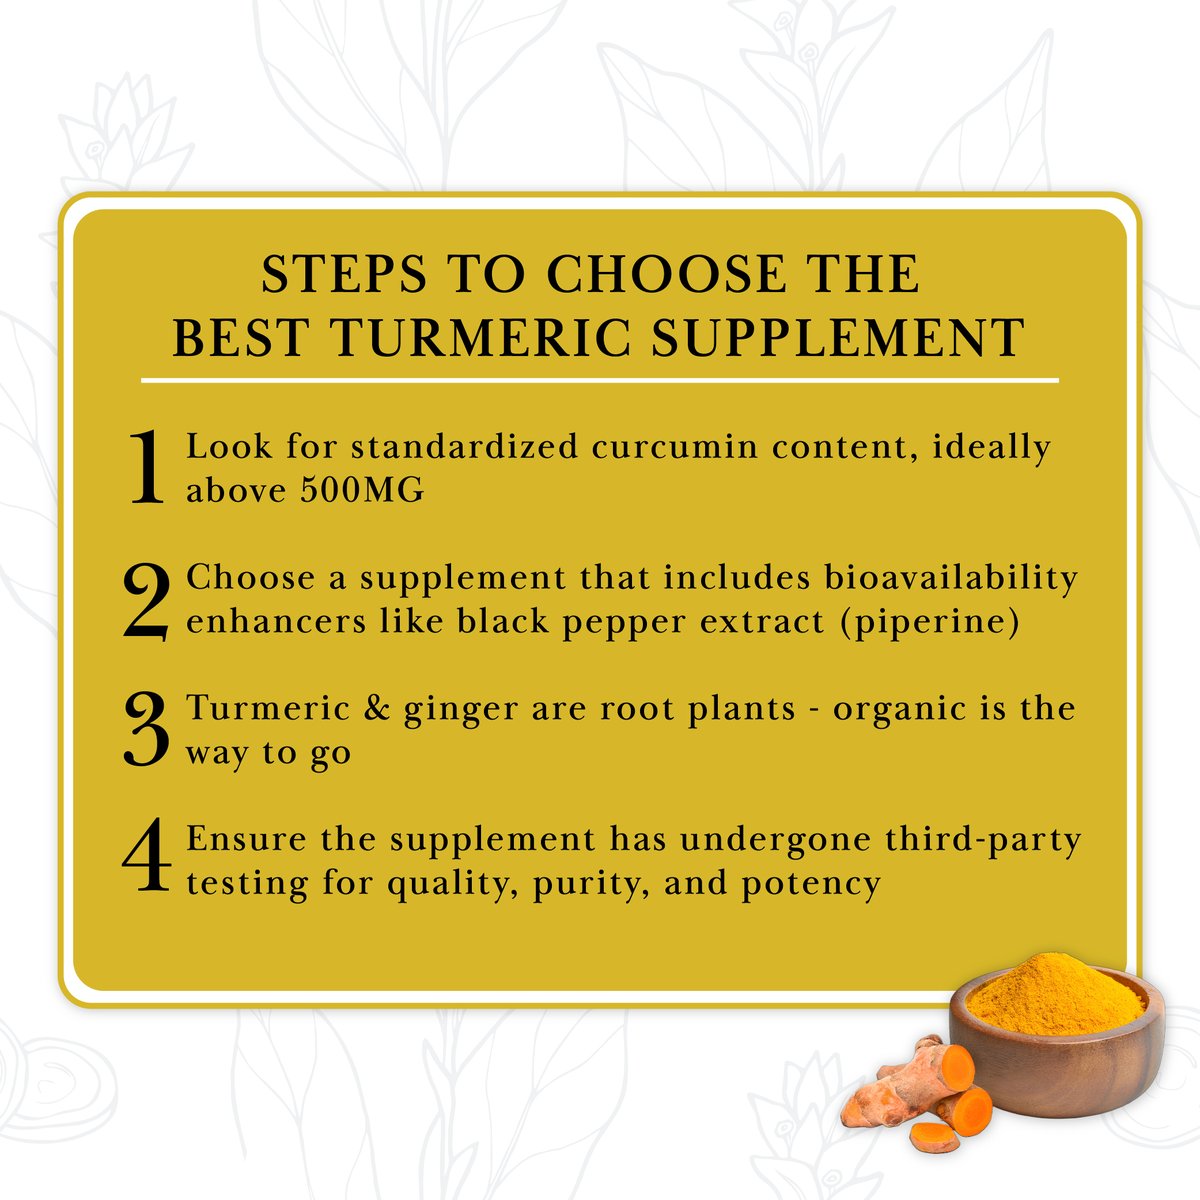 Discover the Golden Goodness of Organic Turmeric 670mg! 🌟🌿 Before Price: CA$39.99 After Price: CA$35.99 Use Code: GOLDENDEAL Offer Valid till July 30, 2023 Shop Now #GoldenGoodness #HealthBoost #NaturalRemedy #SuperfoodPower #SpiceUpYourLife #HolisticHealth #OrganicTurmeric